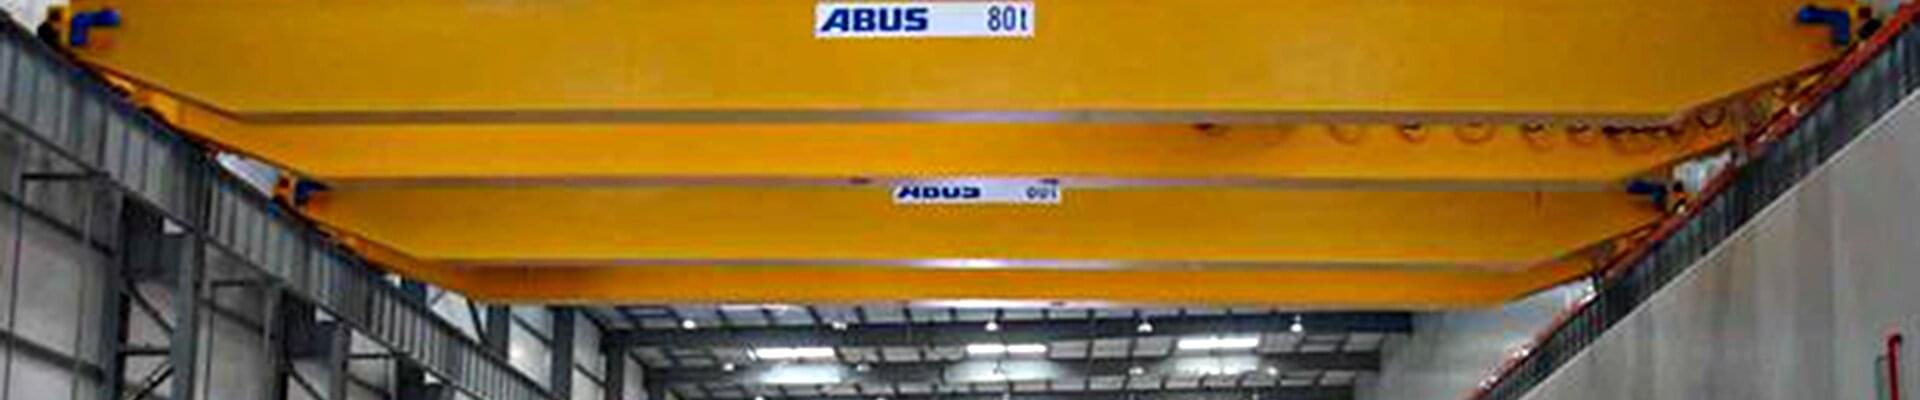 ABUS double girder overhead travelling cranes in the company Chart Industries Inc.